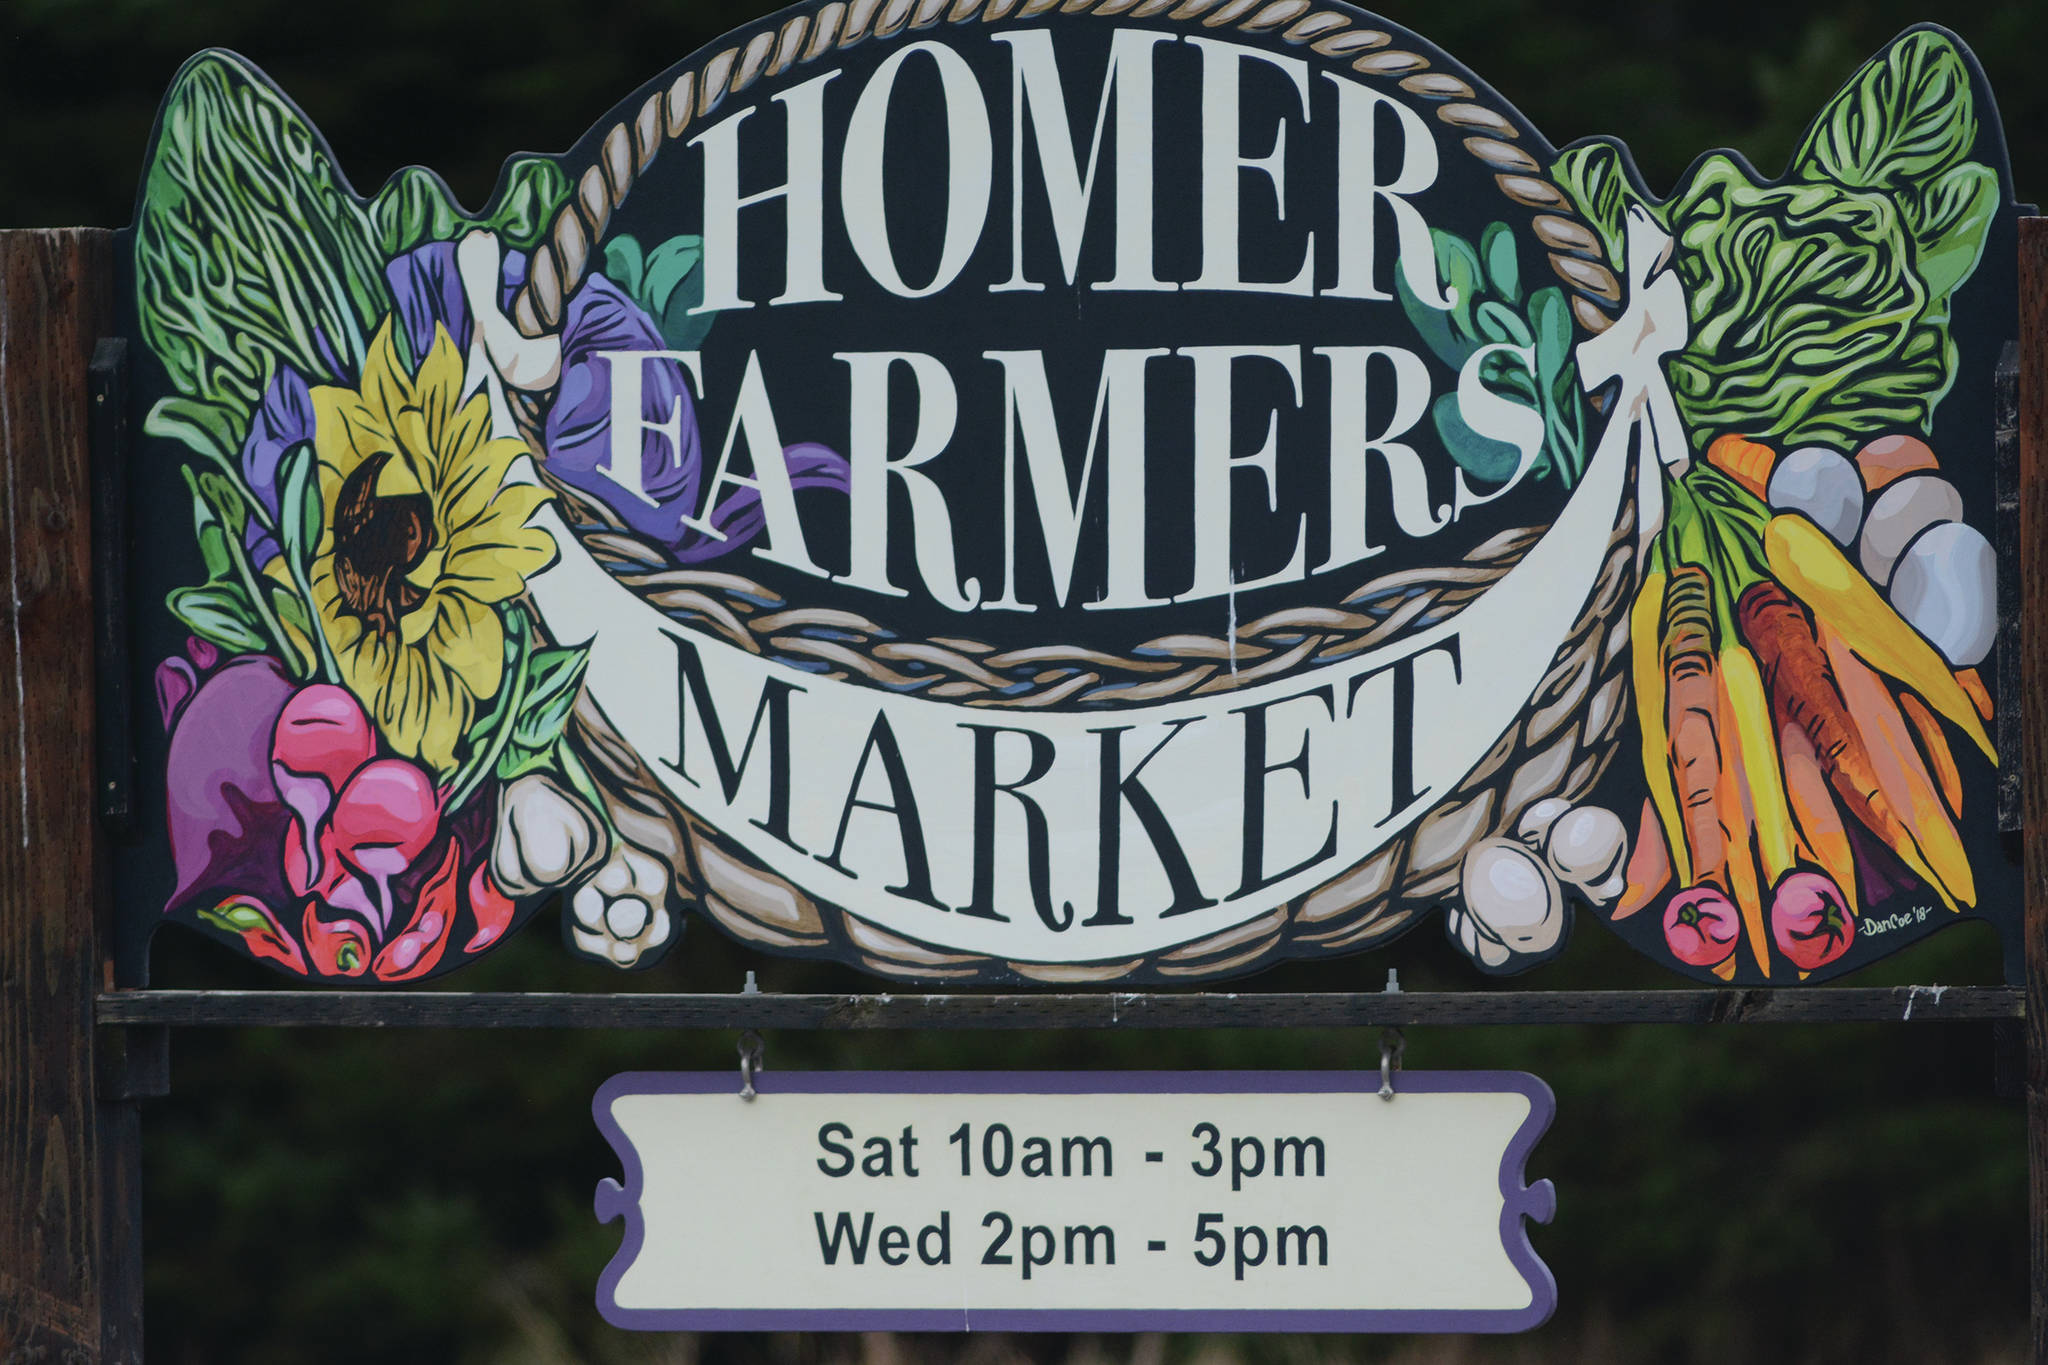 The sign at the Homer Farmers Market on Ocean Drive, as seen on April 24, 2020, in Homer, Alaska. (Photo by Michael Armstrong/Homer News)